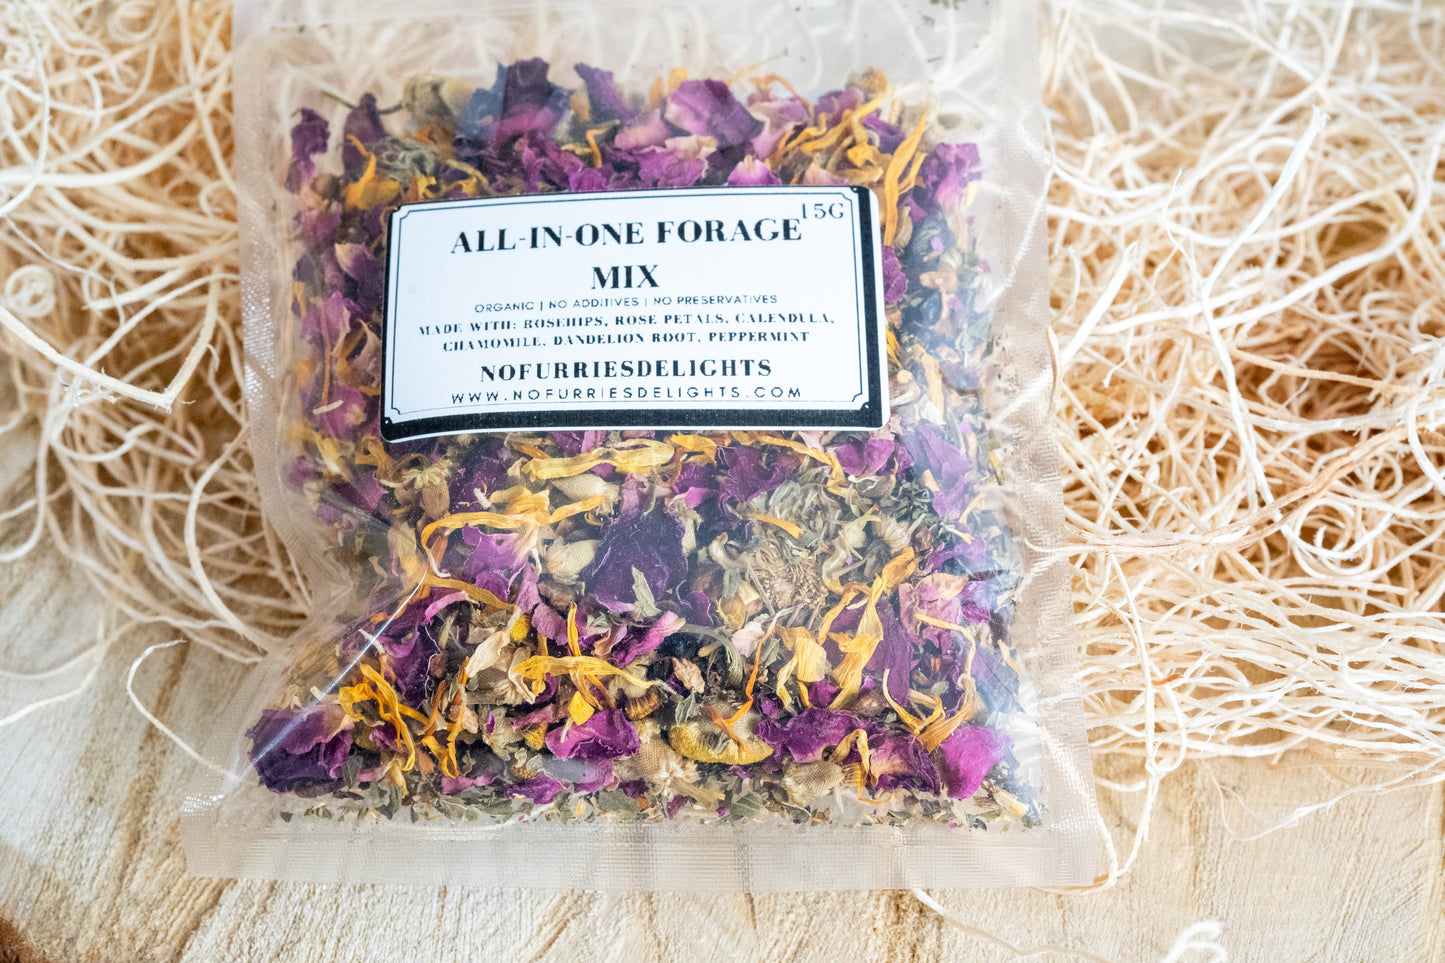 Forage mix made with rosehips, rose petals, calendula, chamomile, dandelion root and peppermint for small pets and birds.